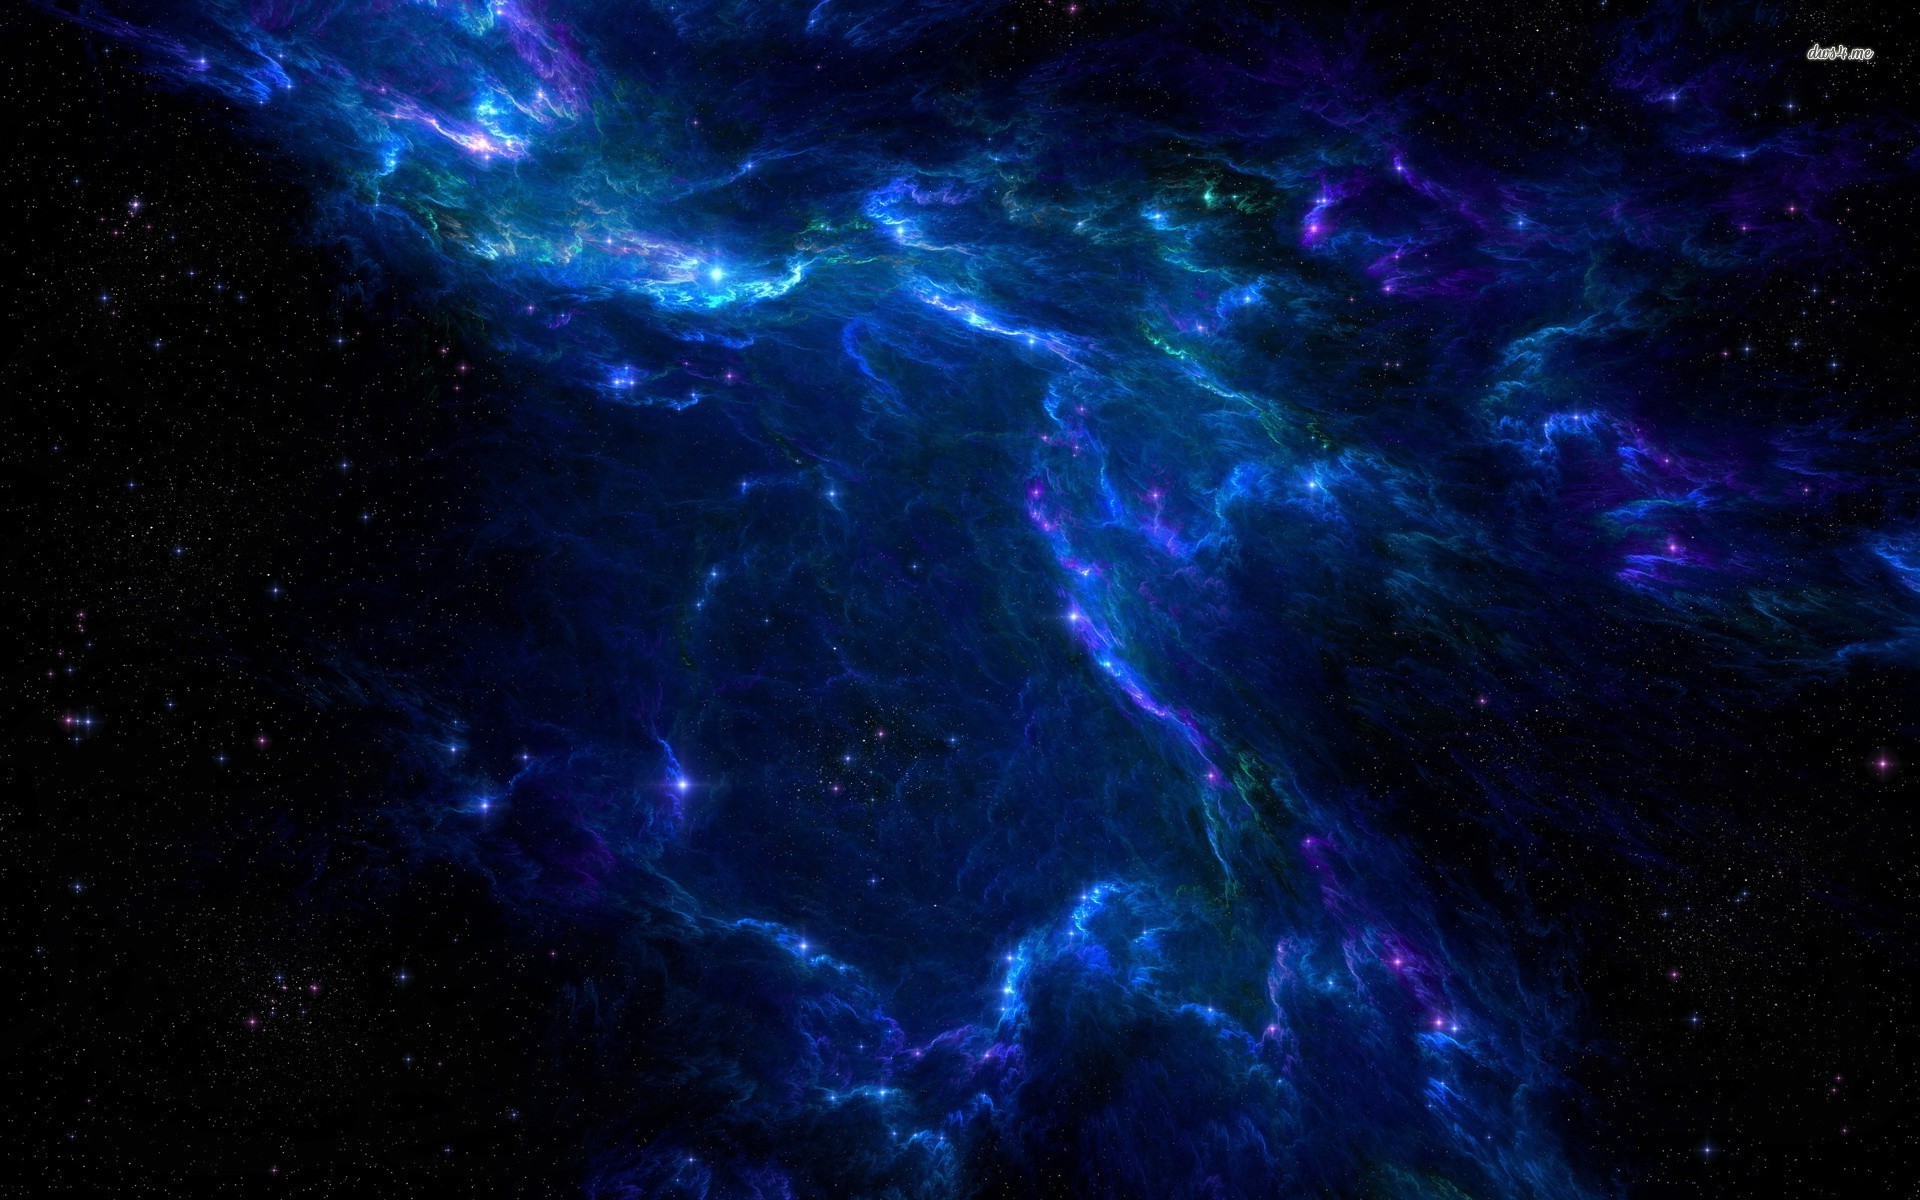 Blue Nebula Space 1 44177 HD Images Wallpapers